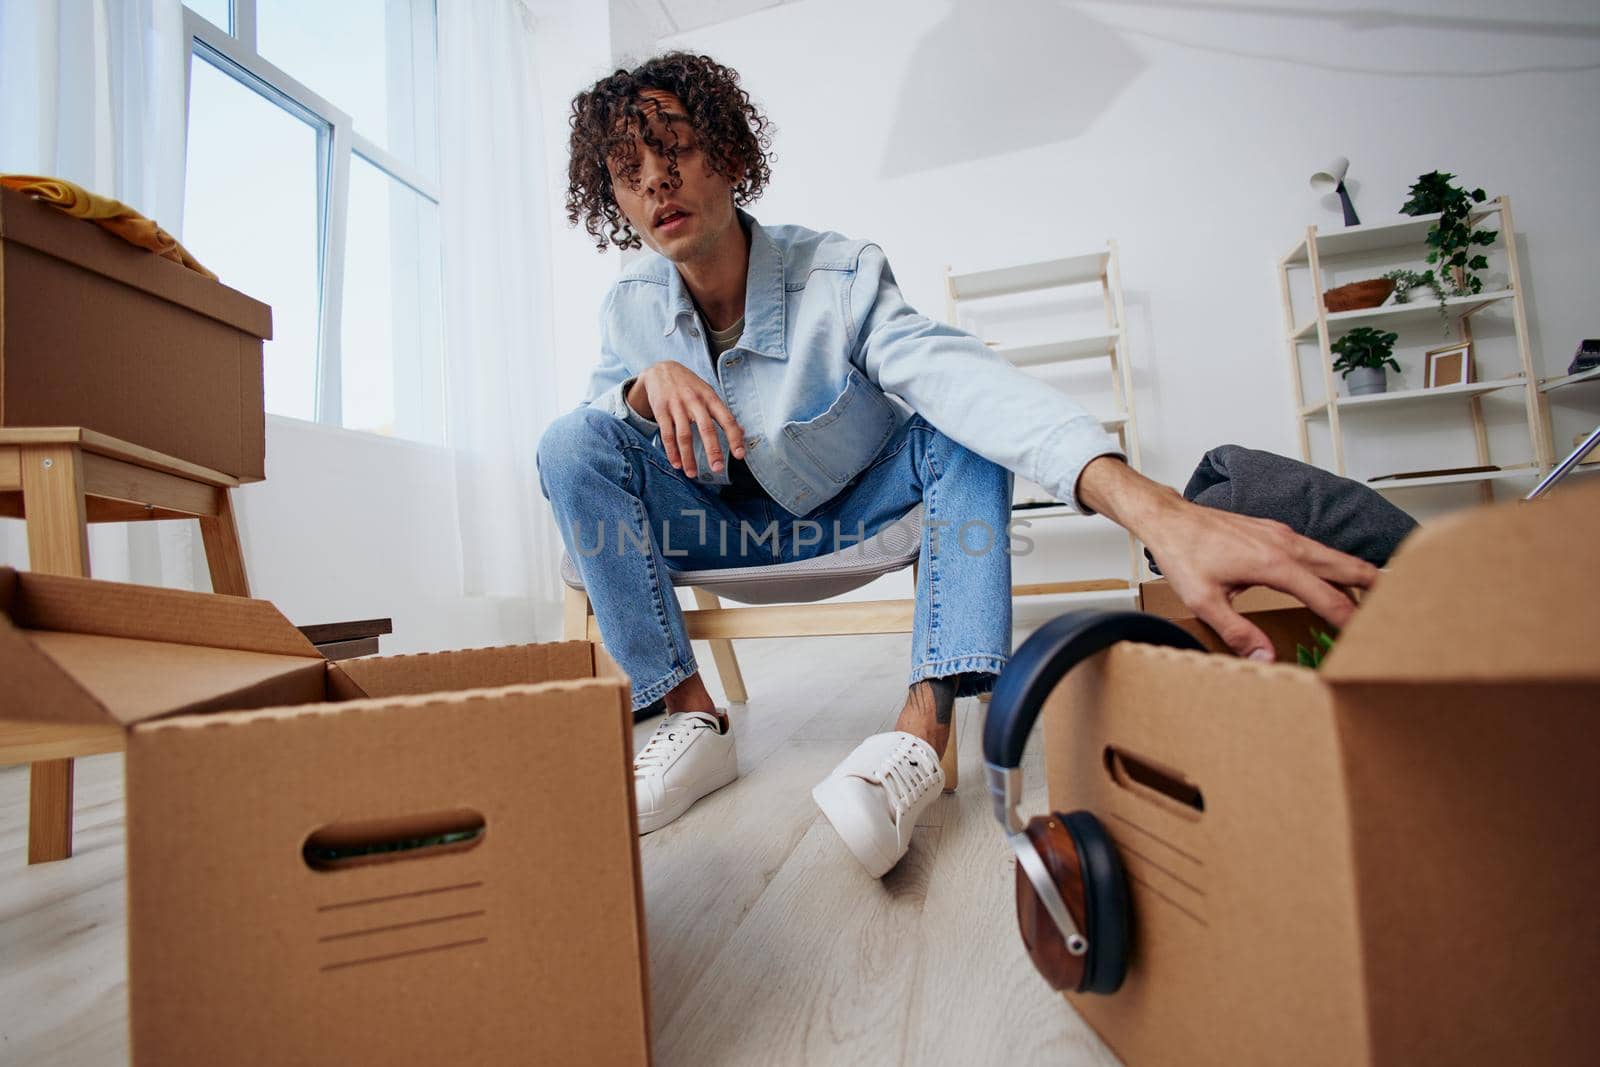 A young man cardboard boxes in the room unpacking headphones Lifestyle by SHOTPRIME